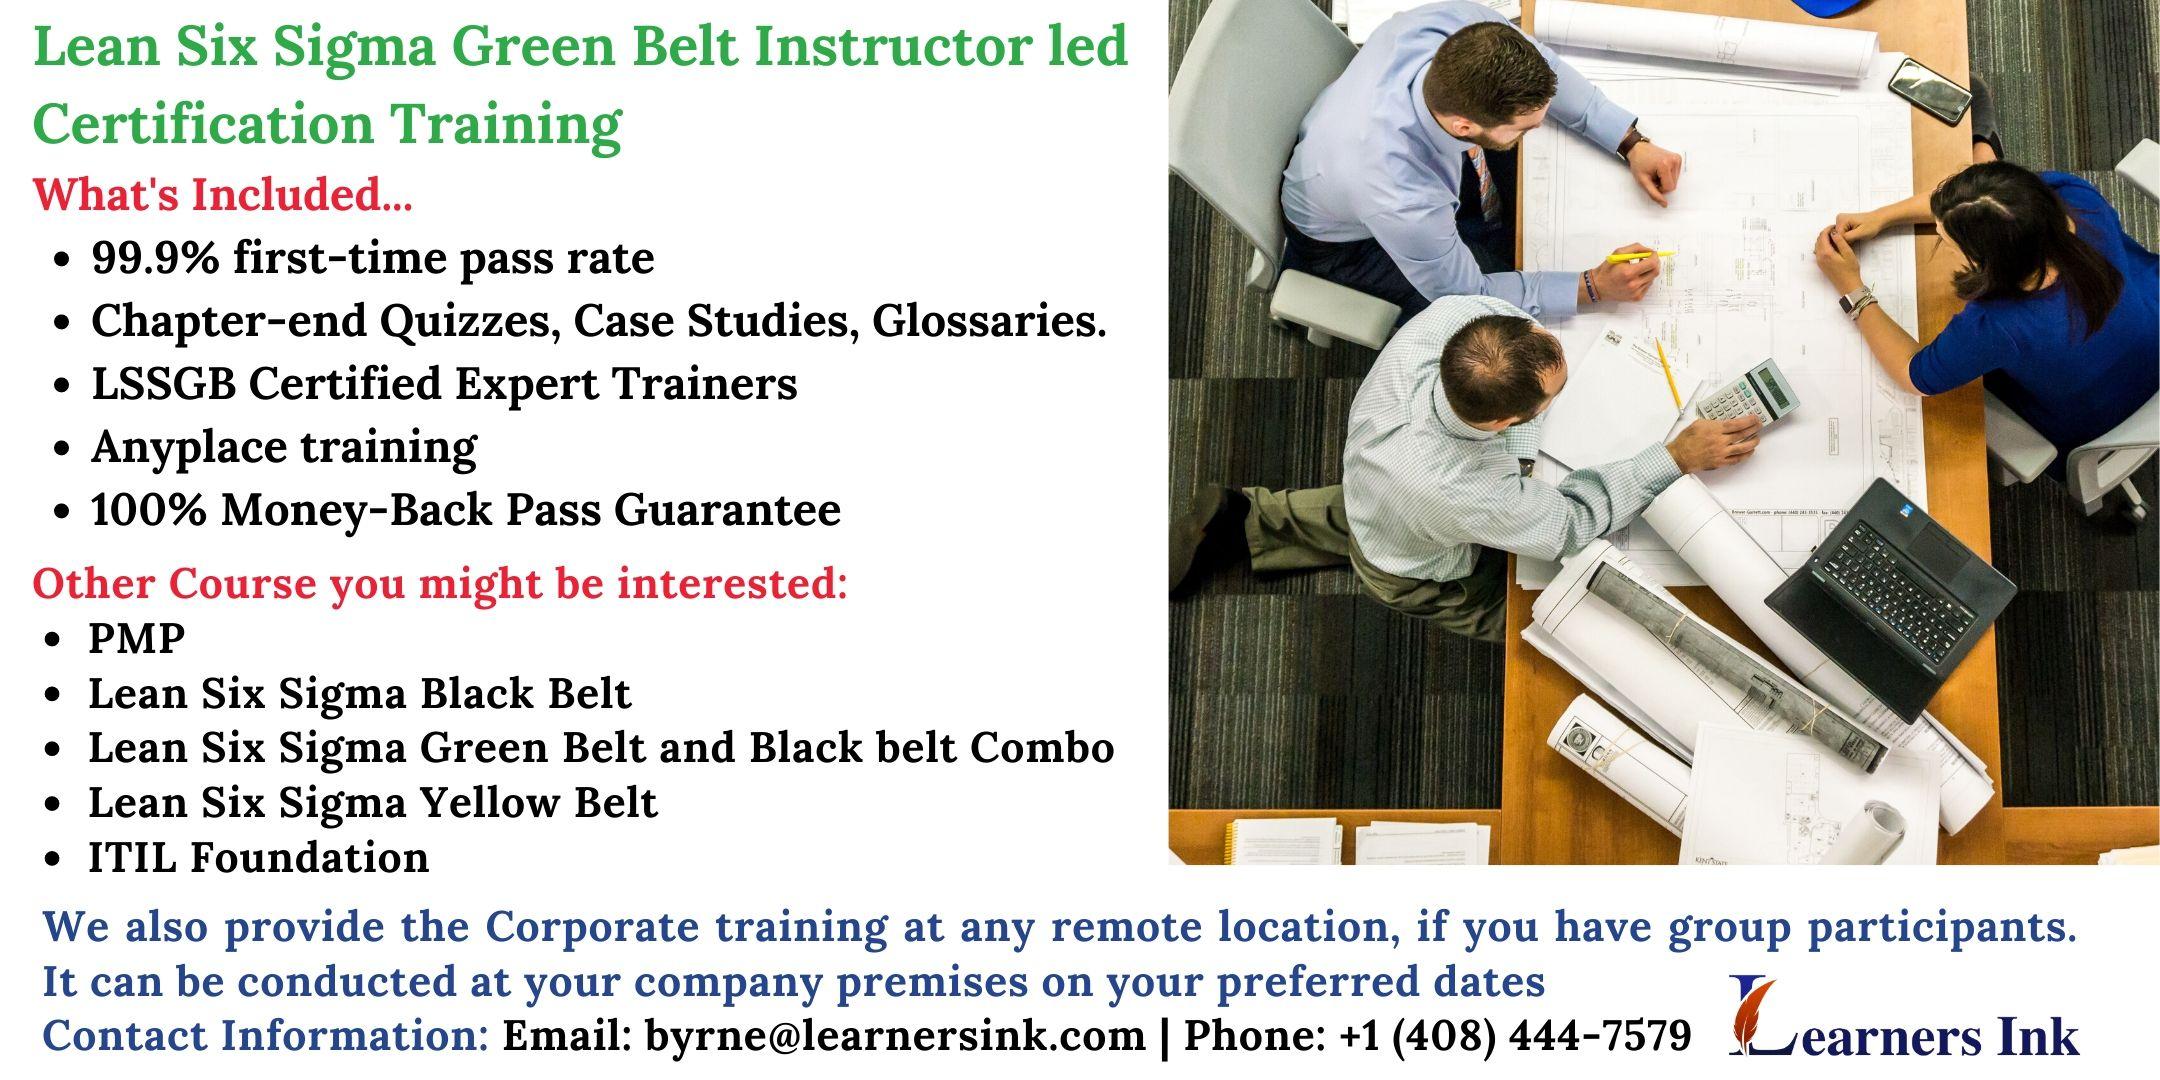 Lean Six Sigma Green Belt Certification Training Course (LSSGB) in Anchorage